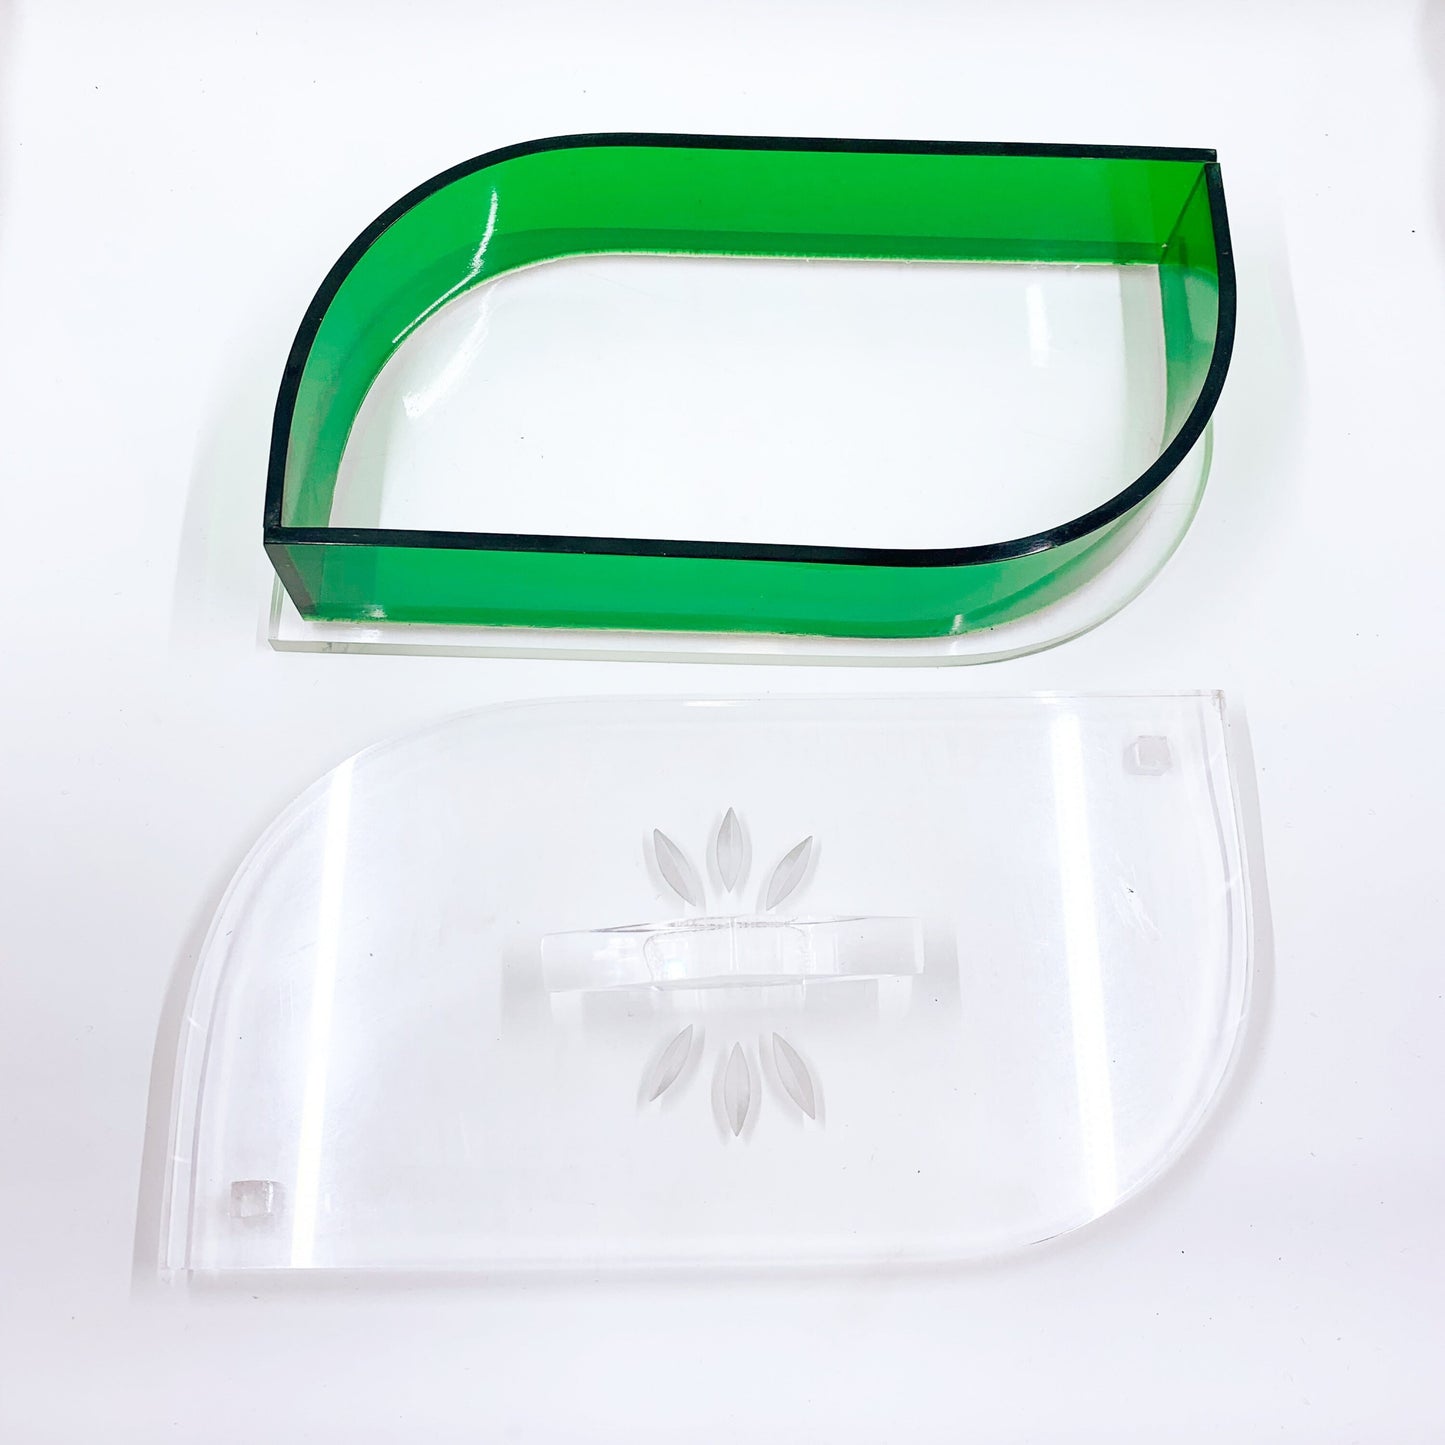 Vintage MCM Green and Clear Geometric Lucite Box | Lucite Mid Century Decor